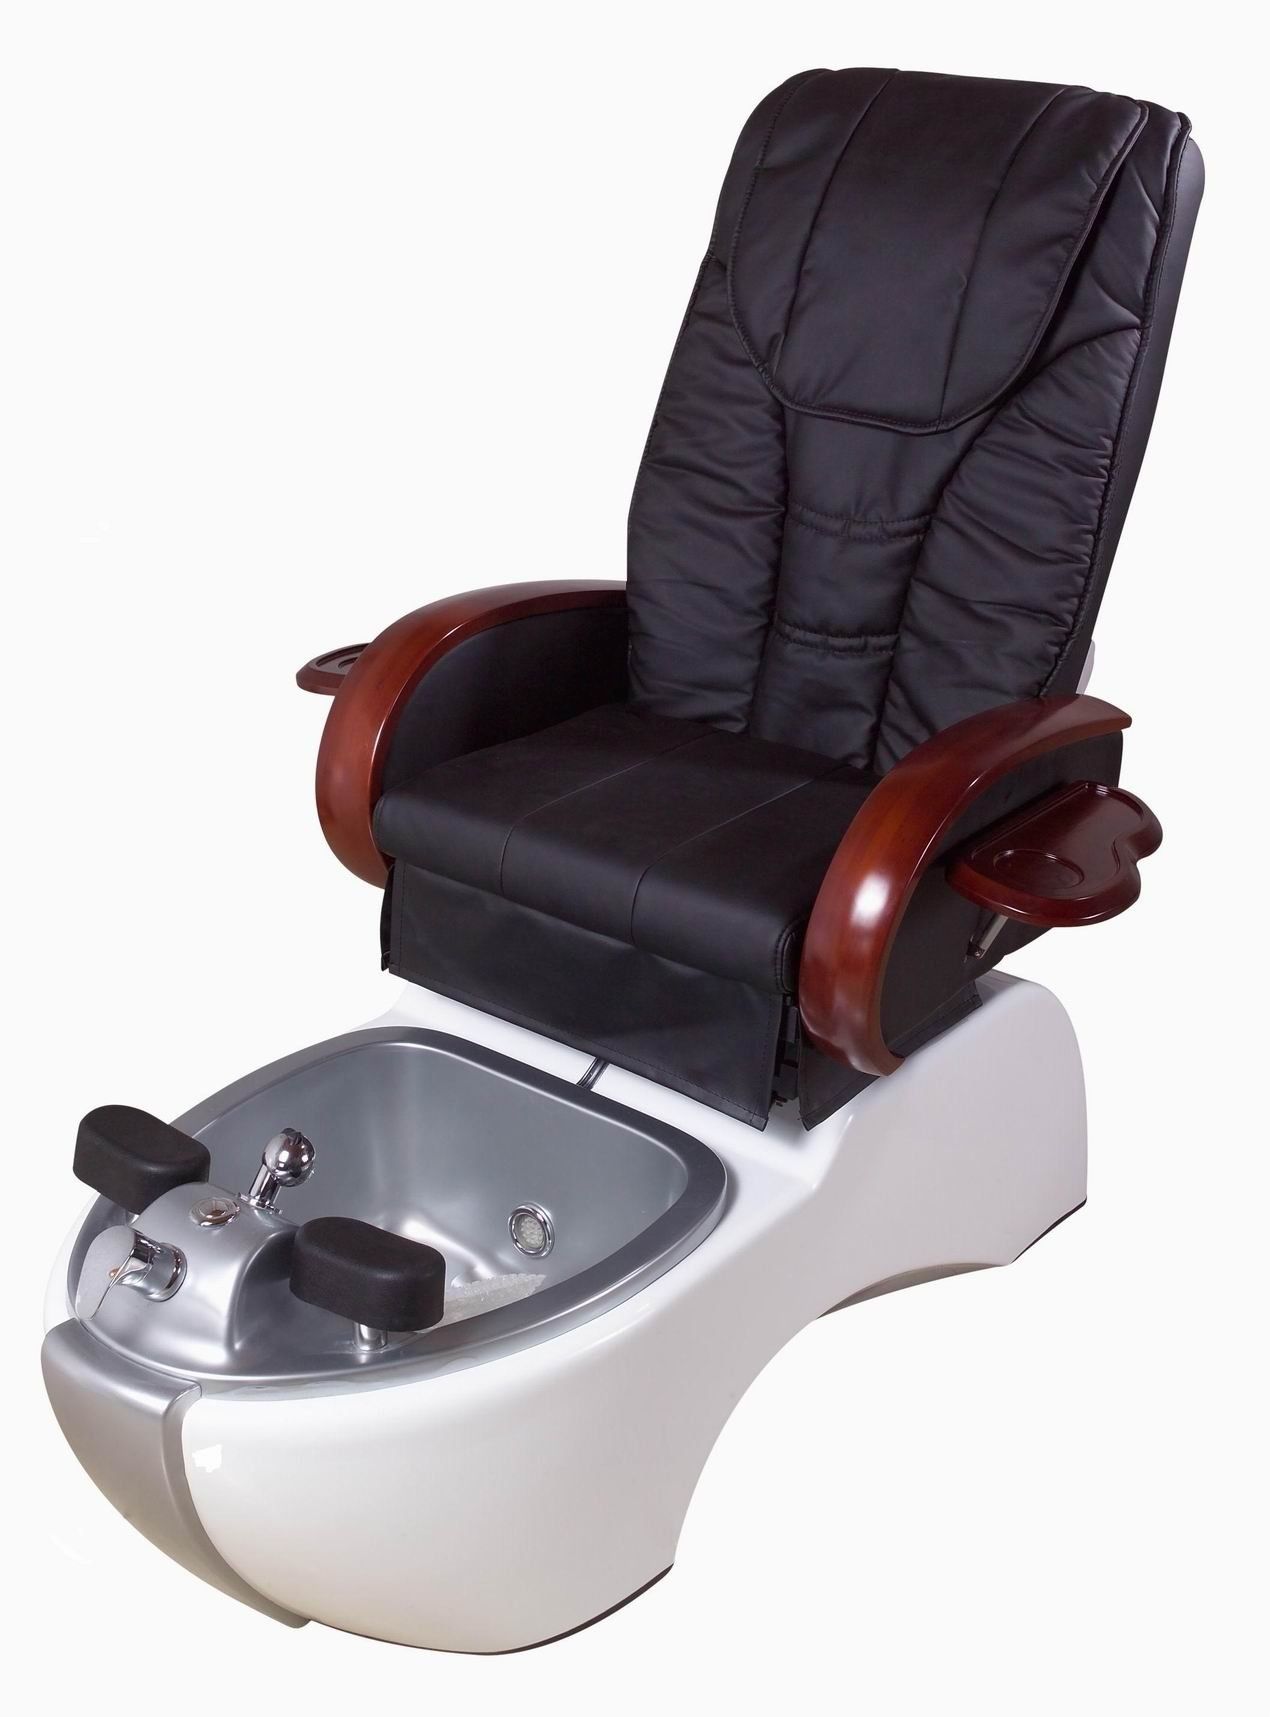 Furniture Chair Design Luxury Lexor Pedicure Chair For Spa Ideas With Sofa Pedicure Chairs (View 13 of 15)